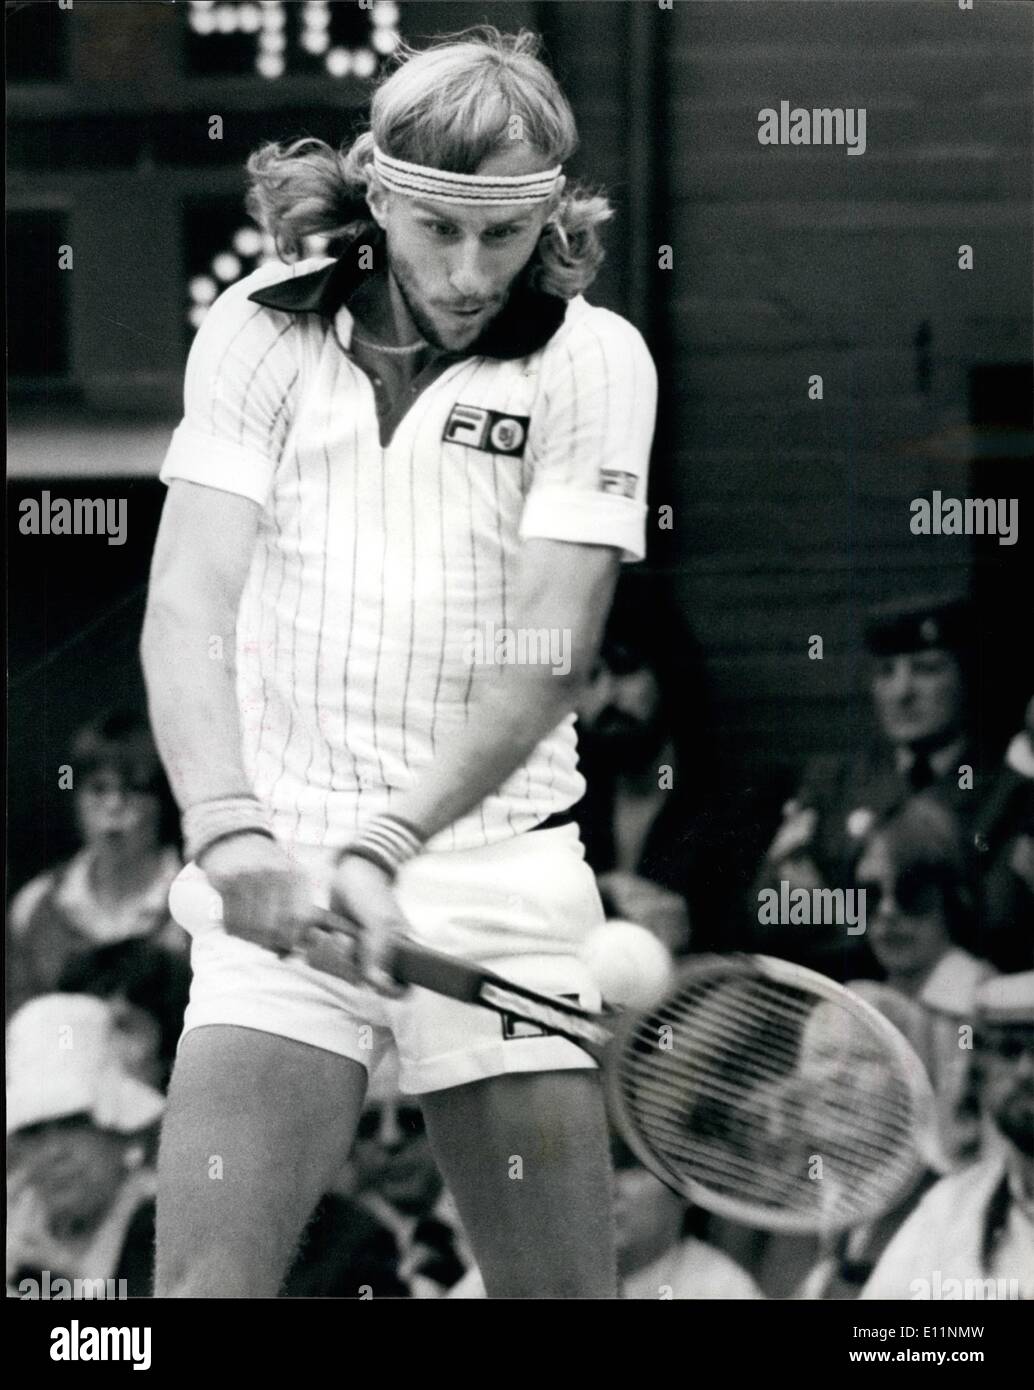 Jul. 07, 1979 - Bjorn Borg Wins His Fourth Successive Wimbledon Title Beating Roscoe Tanner In Five Sets; Today of the Centre Court at Wimbledon Bjorn Borg of Sweden won the Men's Singles title for the fourth Successive time when he beat the American Roscoe Tanner in five sets. Photo Shows Bjorn Borg seen in action against Roscoe Tanner on the center court. Stock Photo